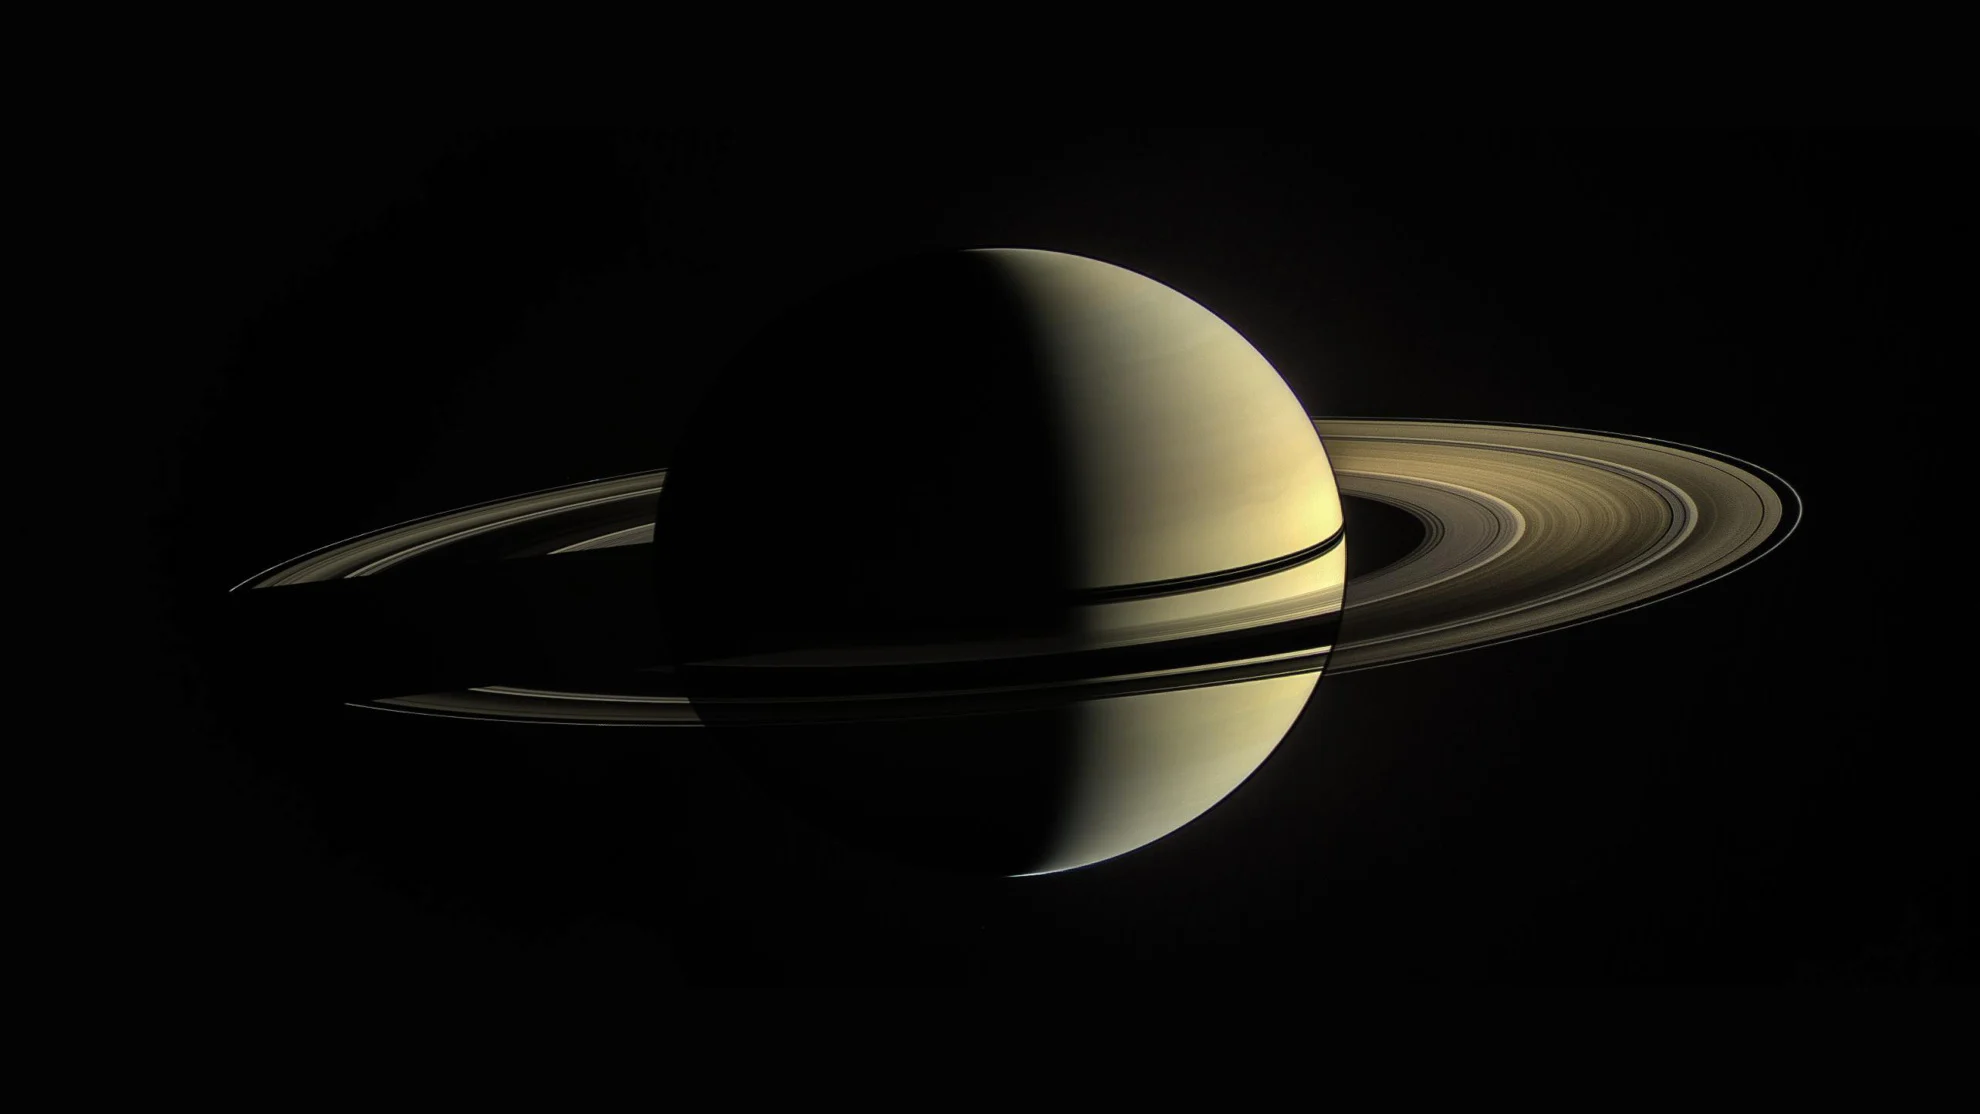 Saturn is the new 'Moon King' of the solar system